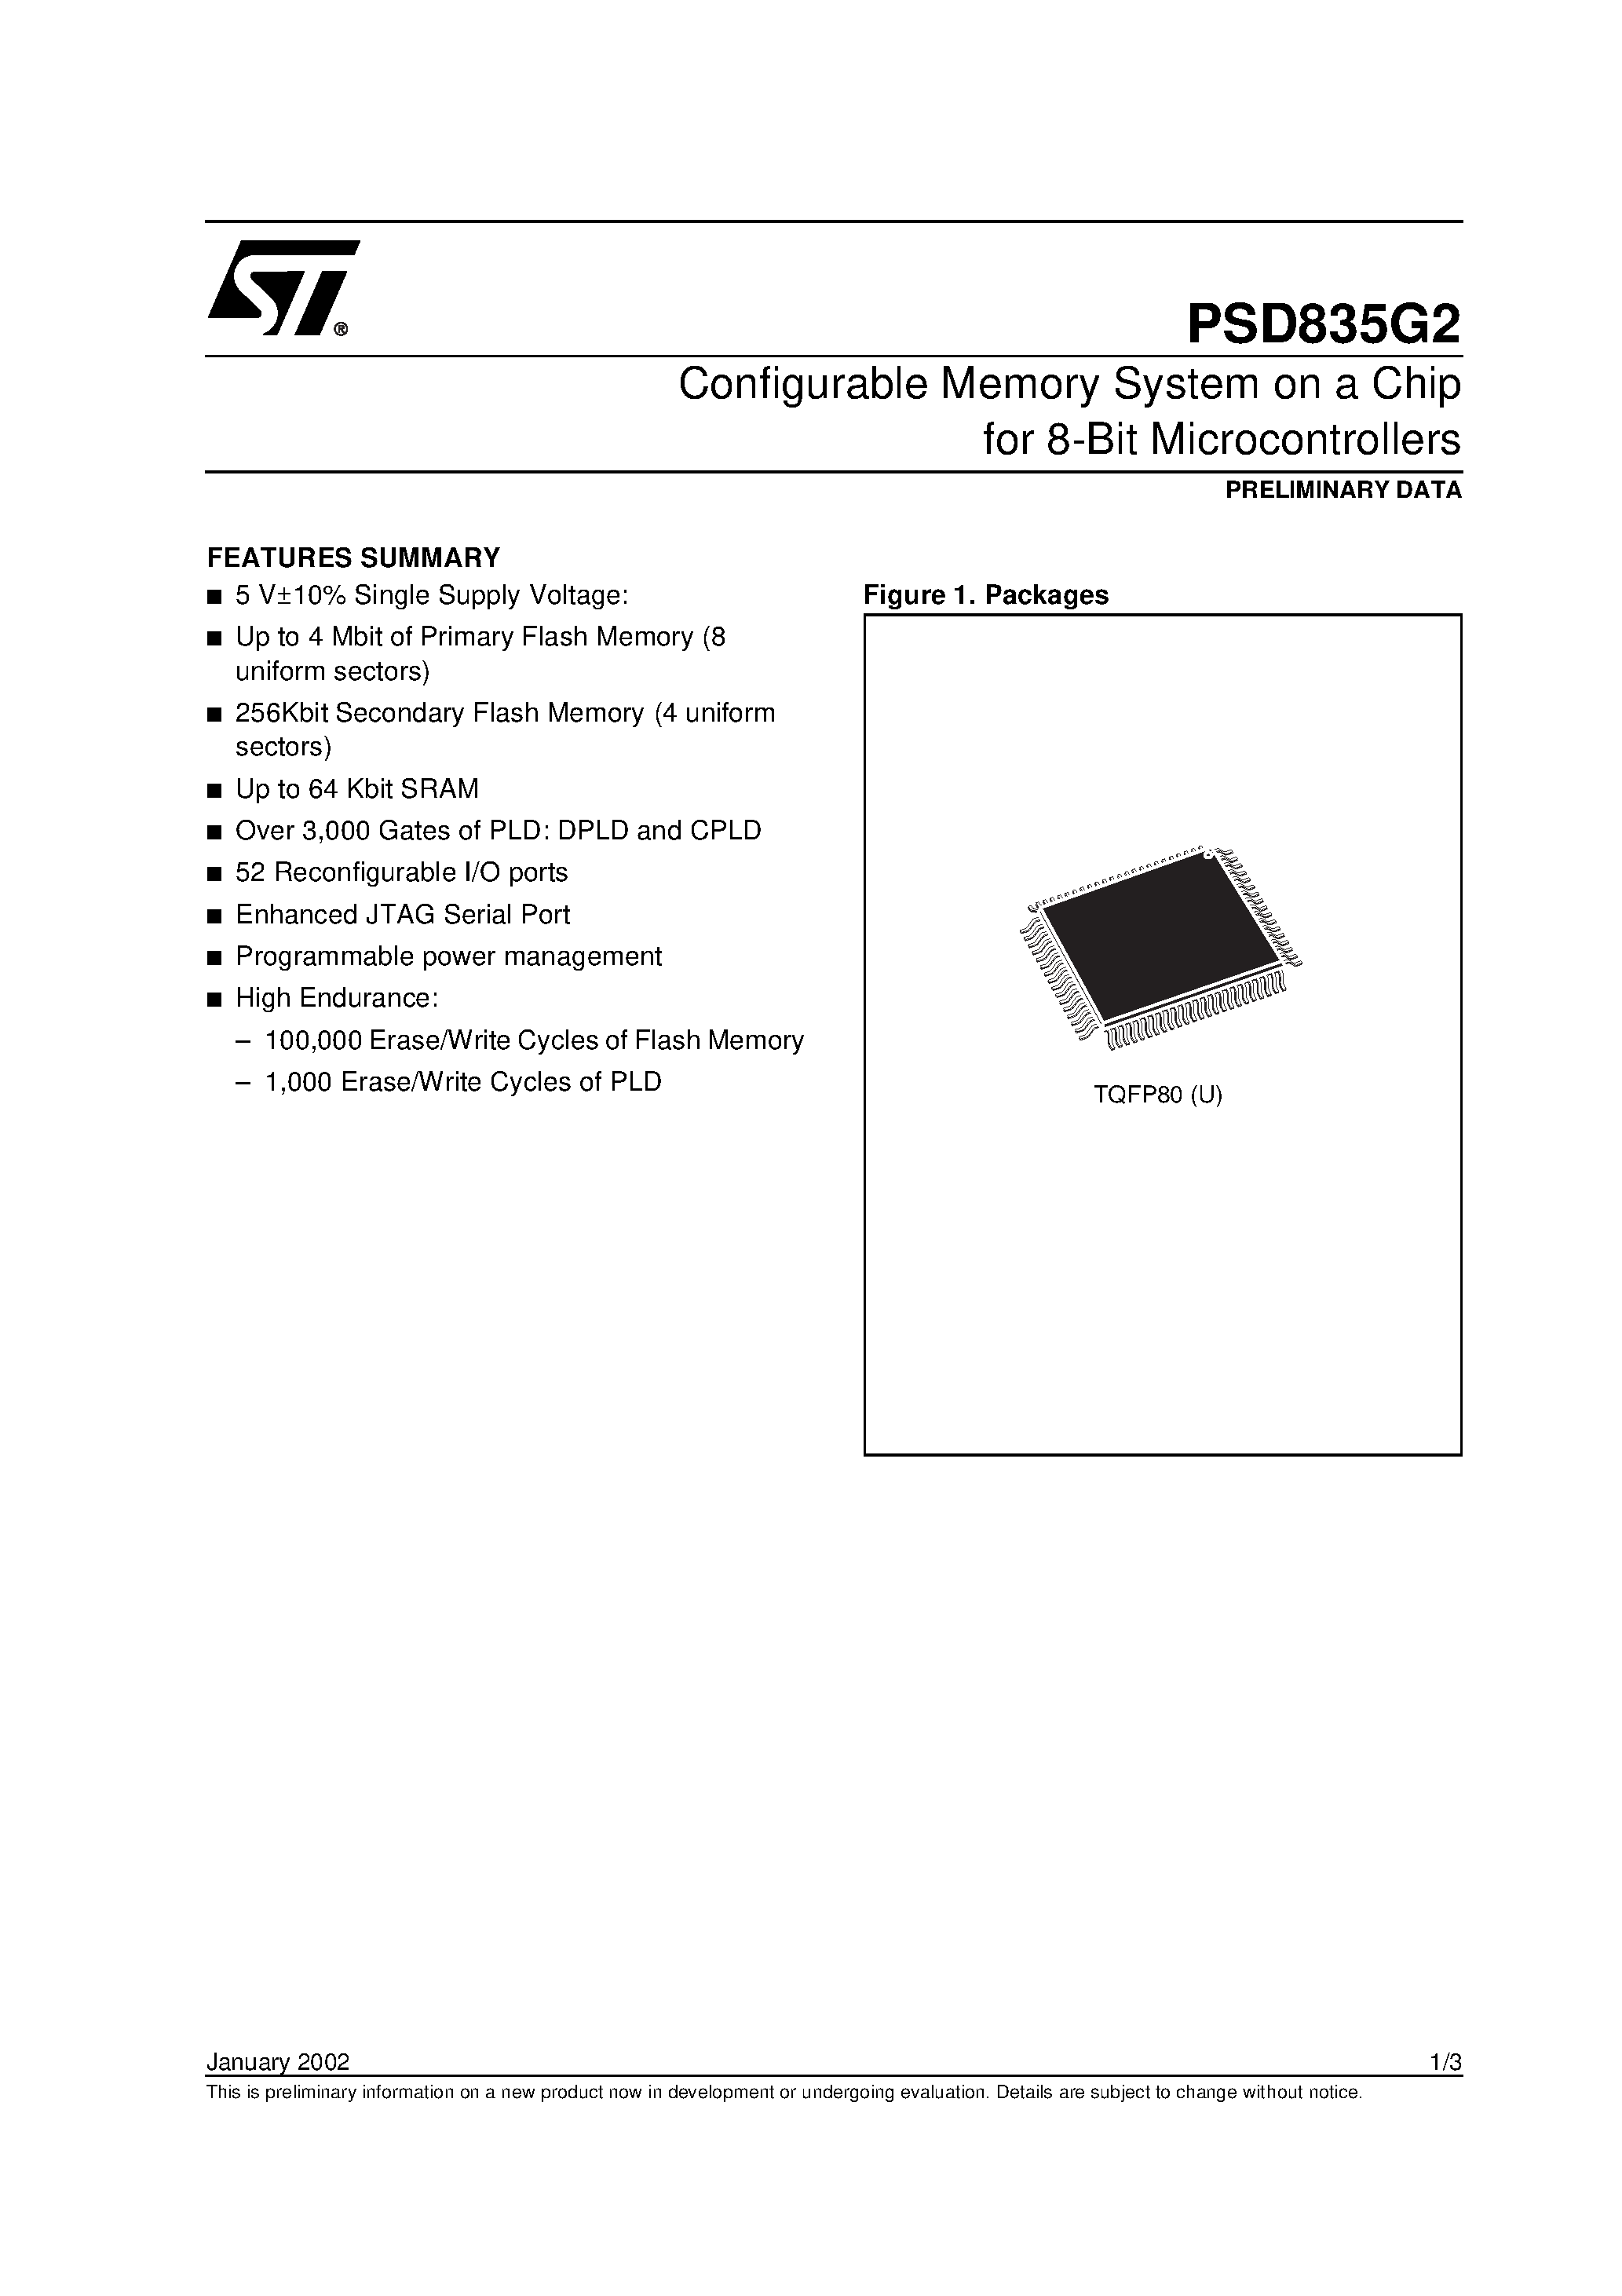 Datasheet PSD835F2-A-70J - Configurable Memory System on a Chip for 8-Bit Microcontrollers page 1